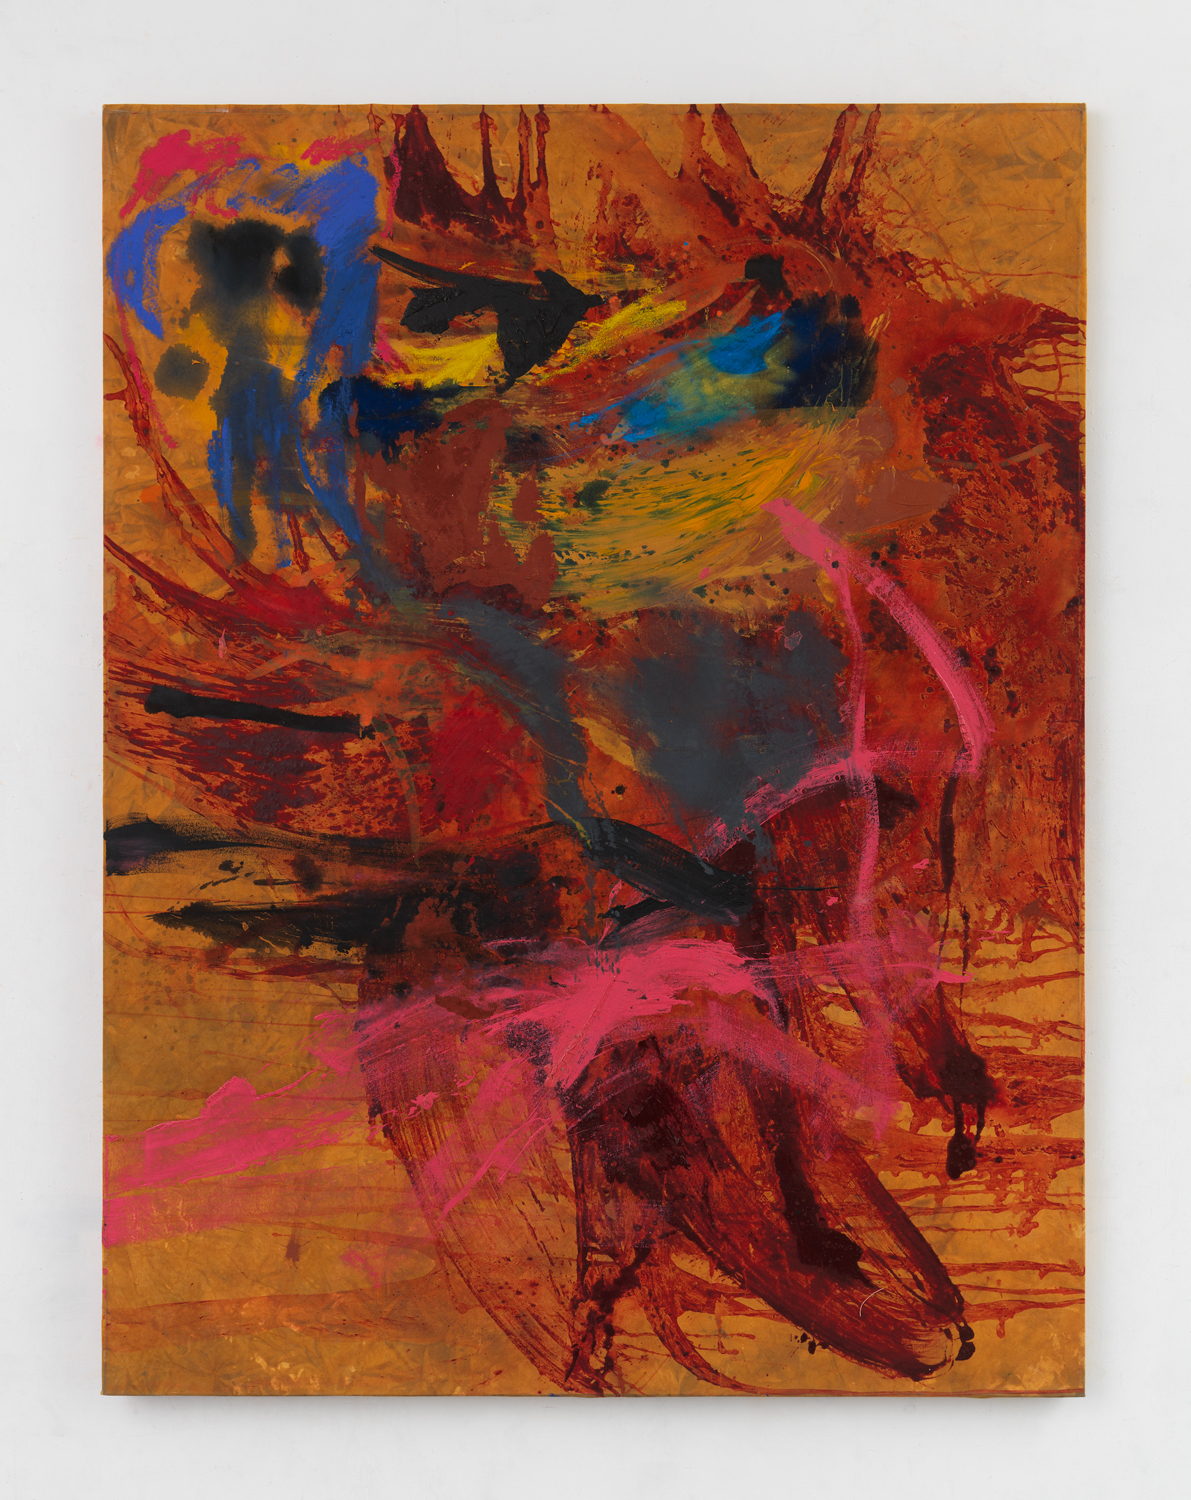 Bill Saylor, Untitled, 2015, Oil, flashe on canvas, 84 x 64 in.